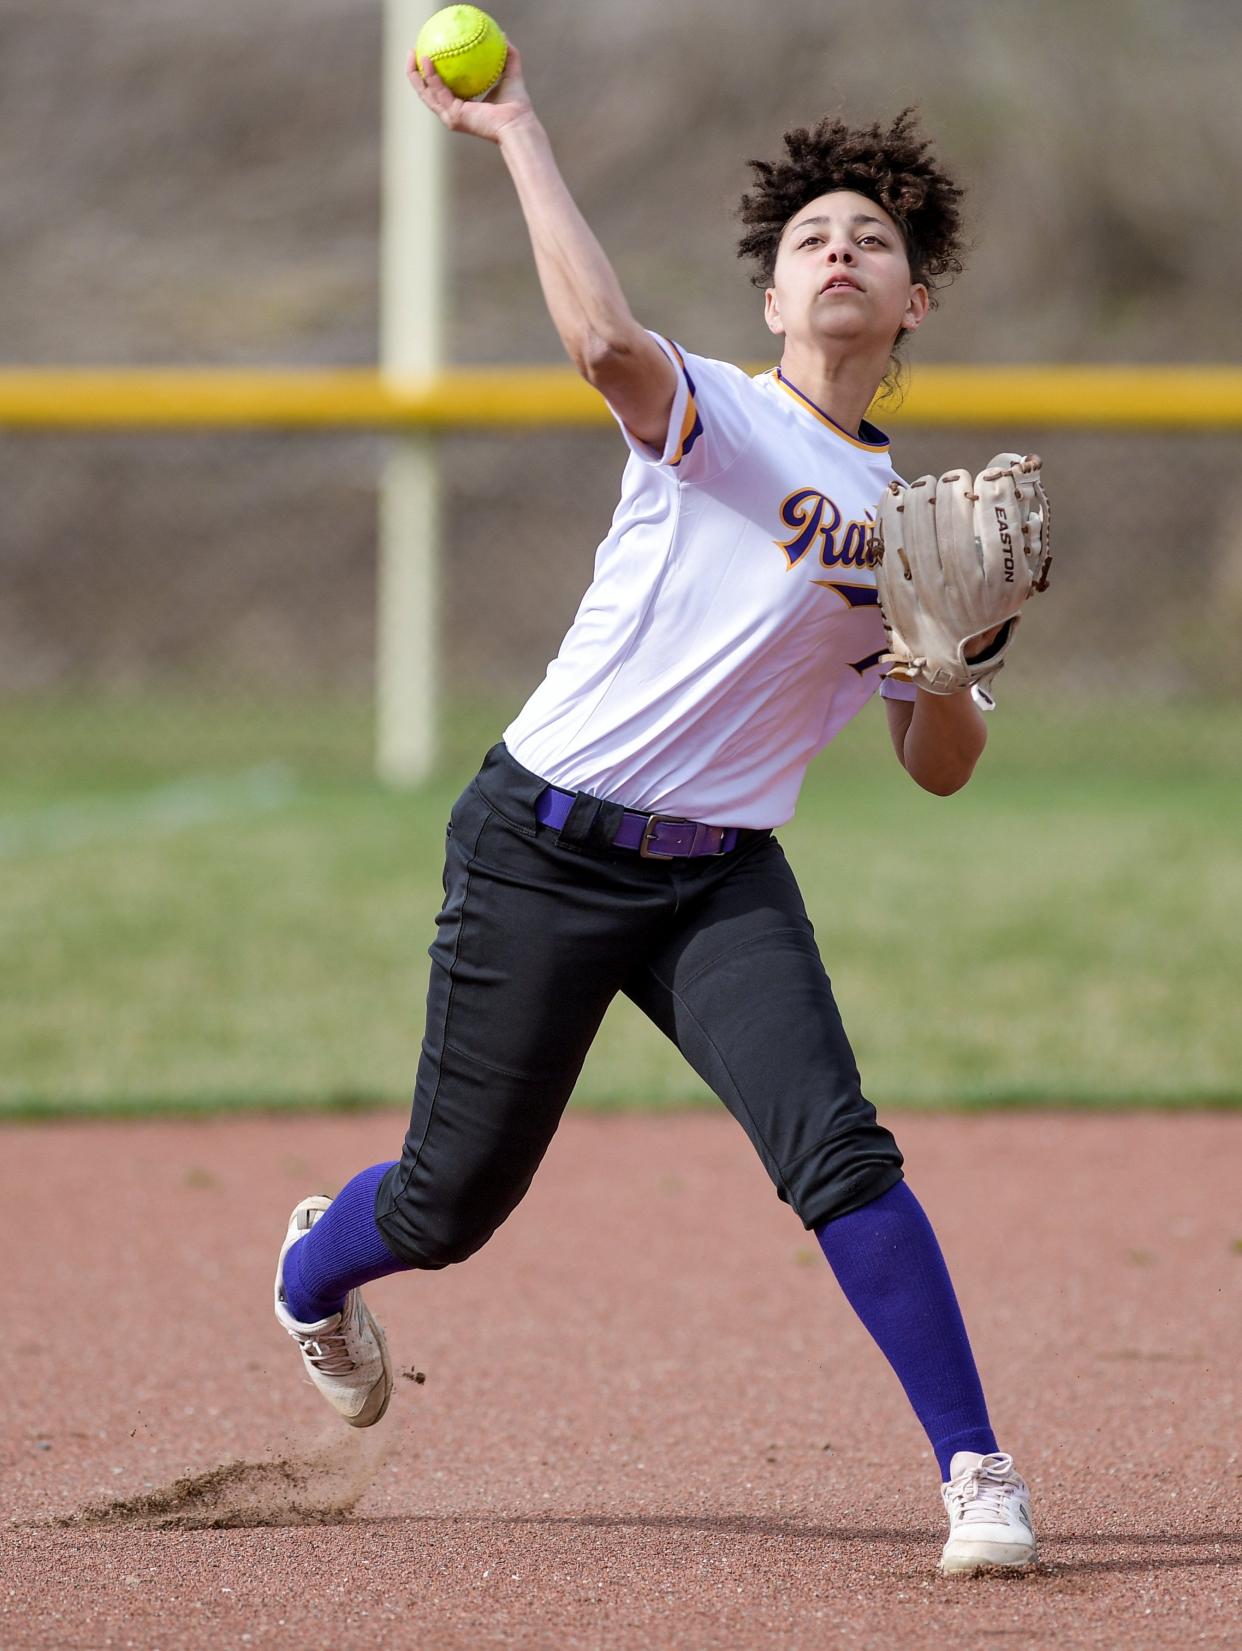 Sophomore third baseman Marley Smith should be one of the top returnees for Reynoldsburg, which finished 6-12 overall and 3-7 in the OCC-Buckeye after winning one league game a year ago.